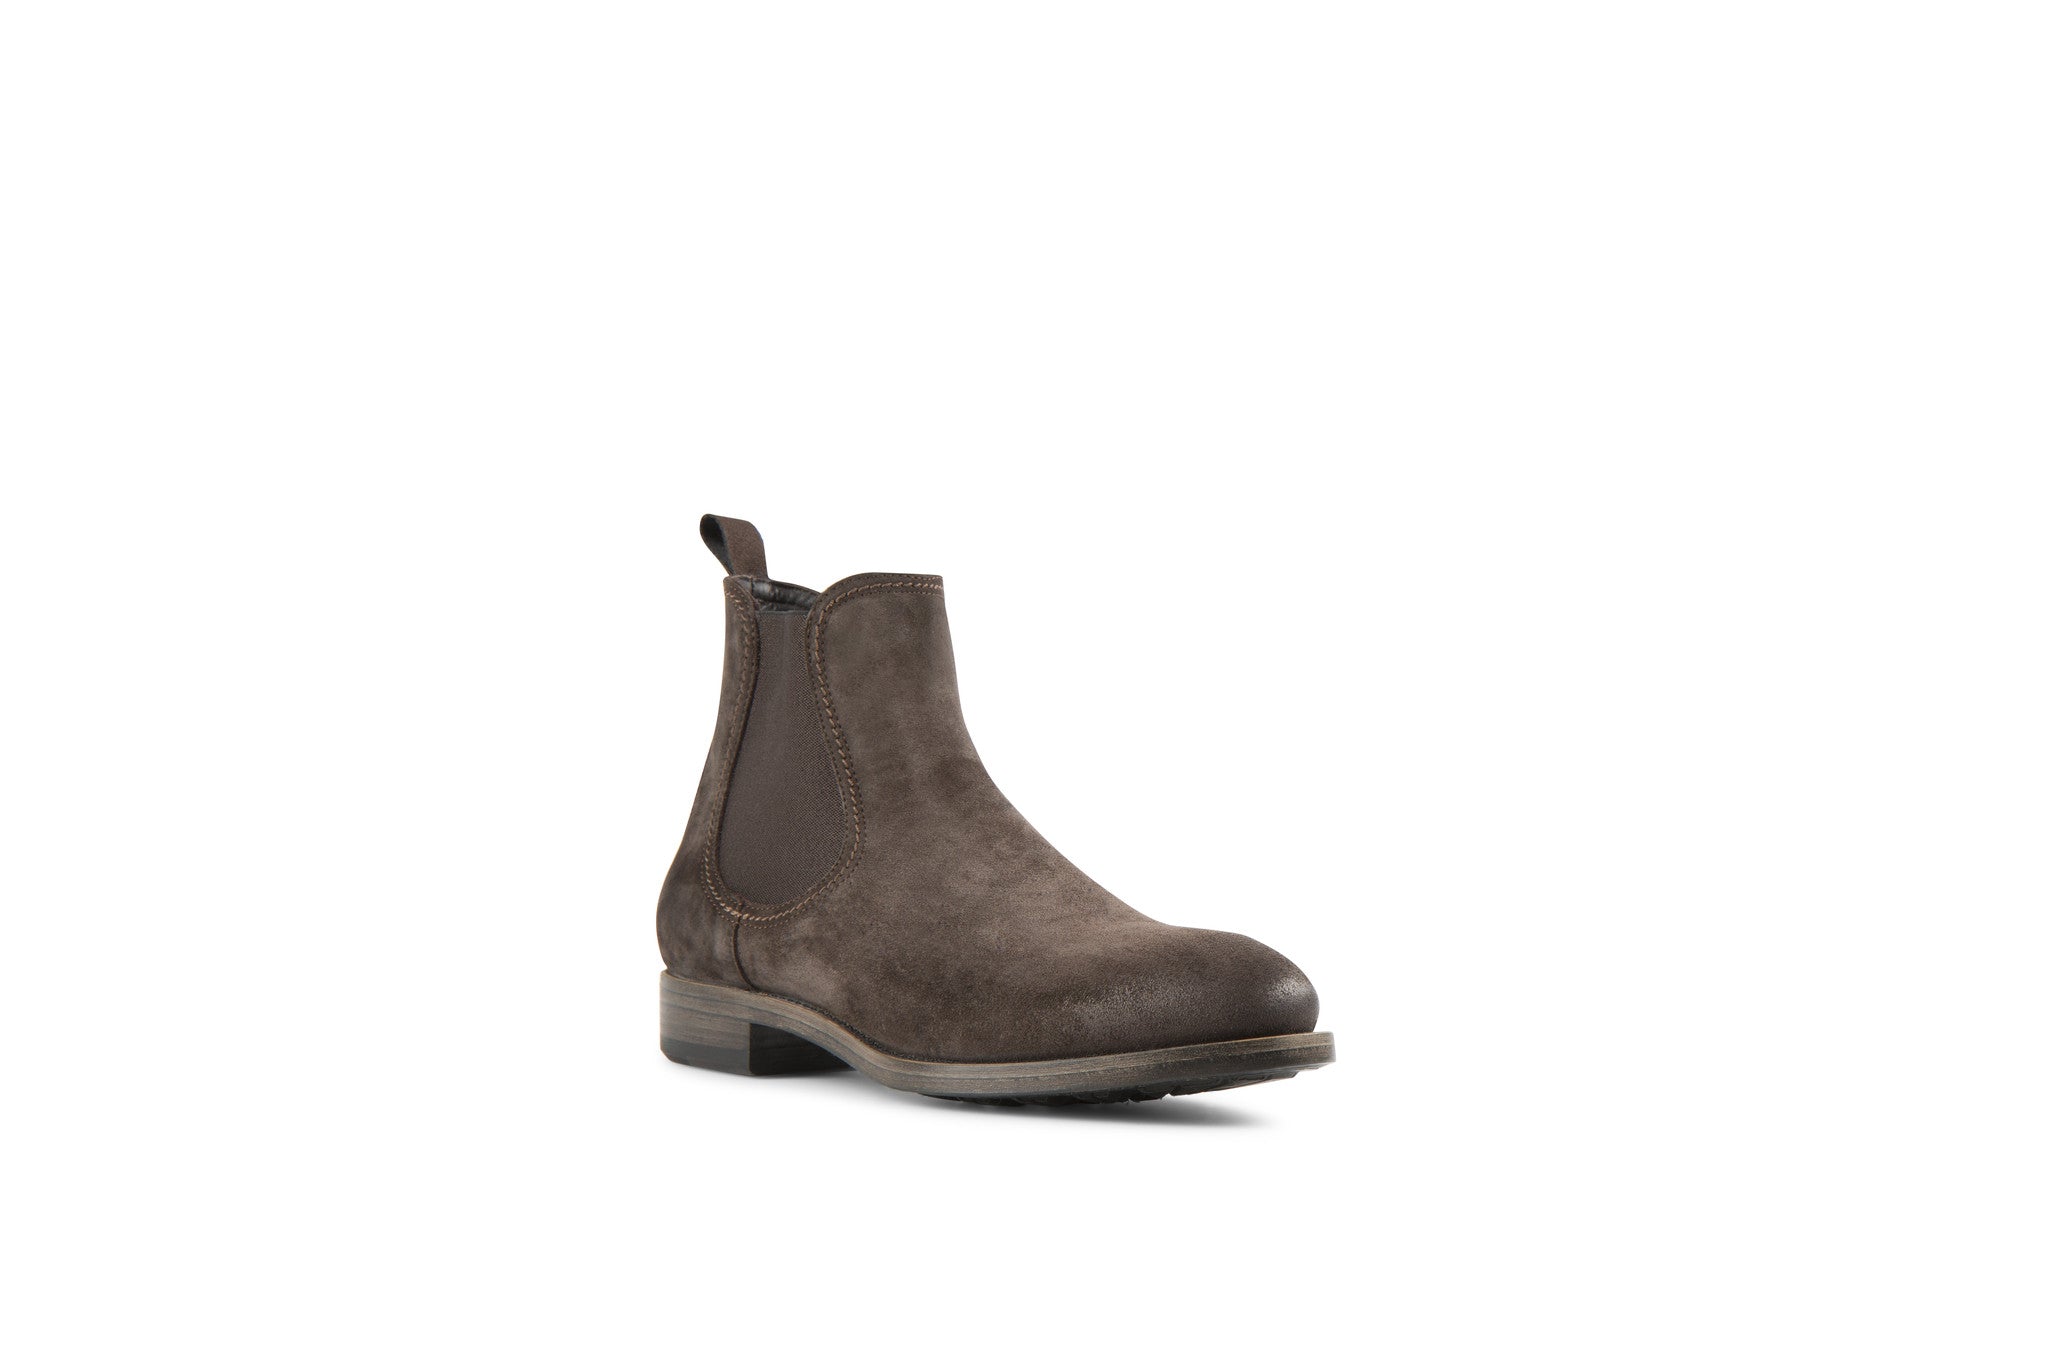 Hanoi Coffee Suede Leather Chelsea Boots